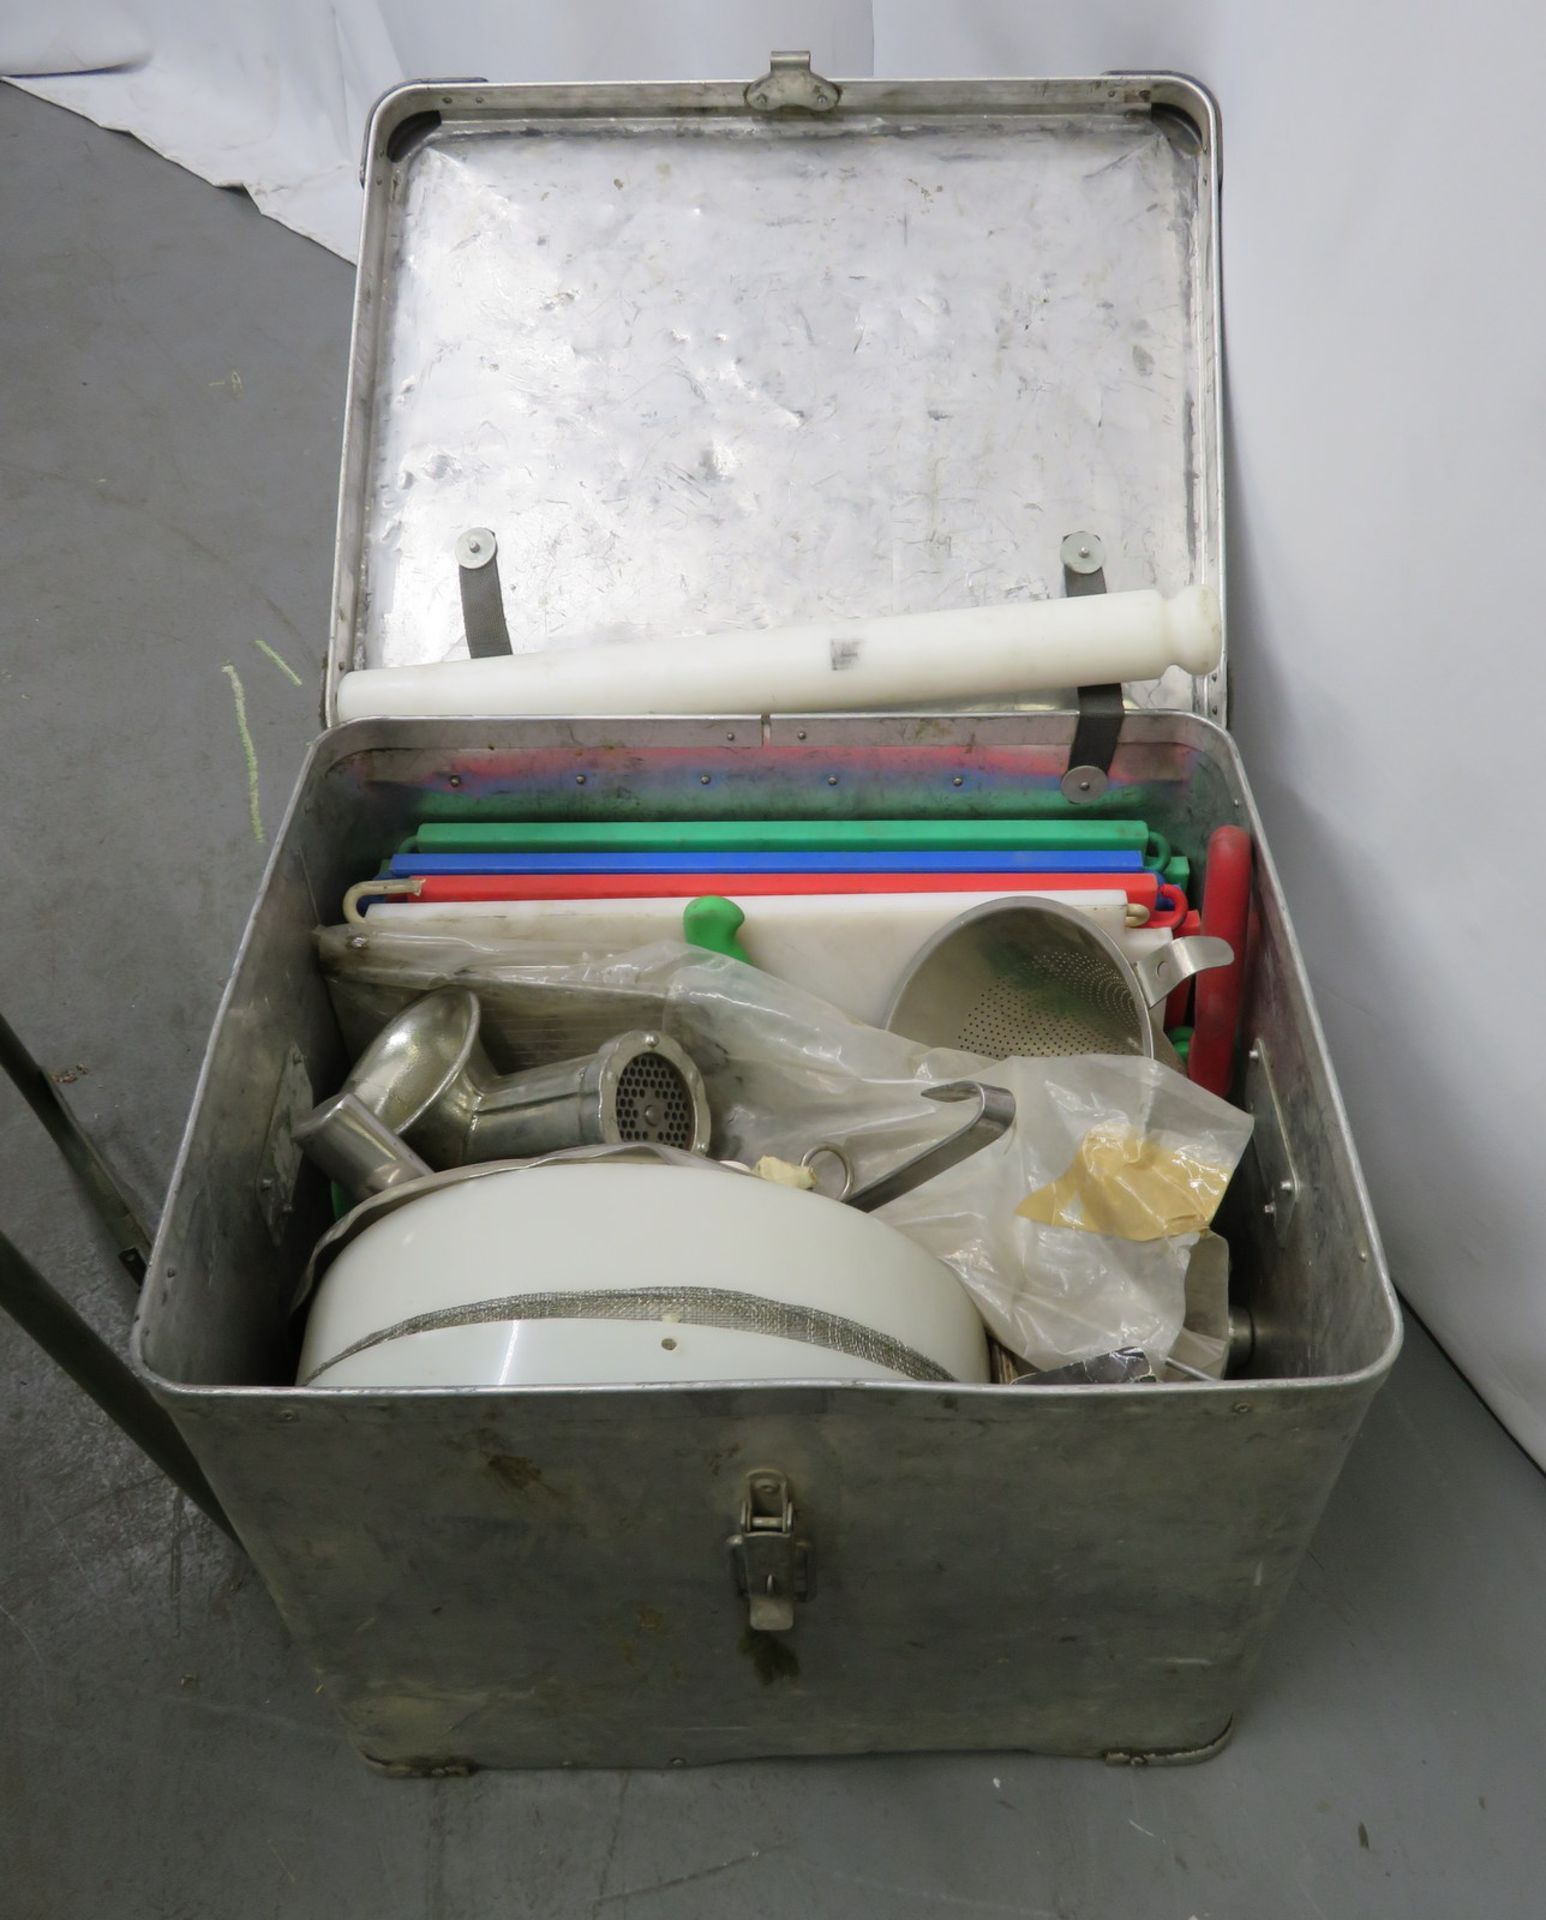 British Army No 5 field cooker & G1 No 5 hot box field oven set. - Image 11 of 18